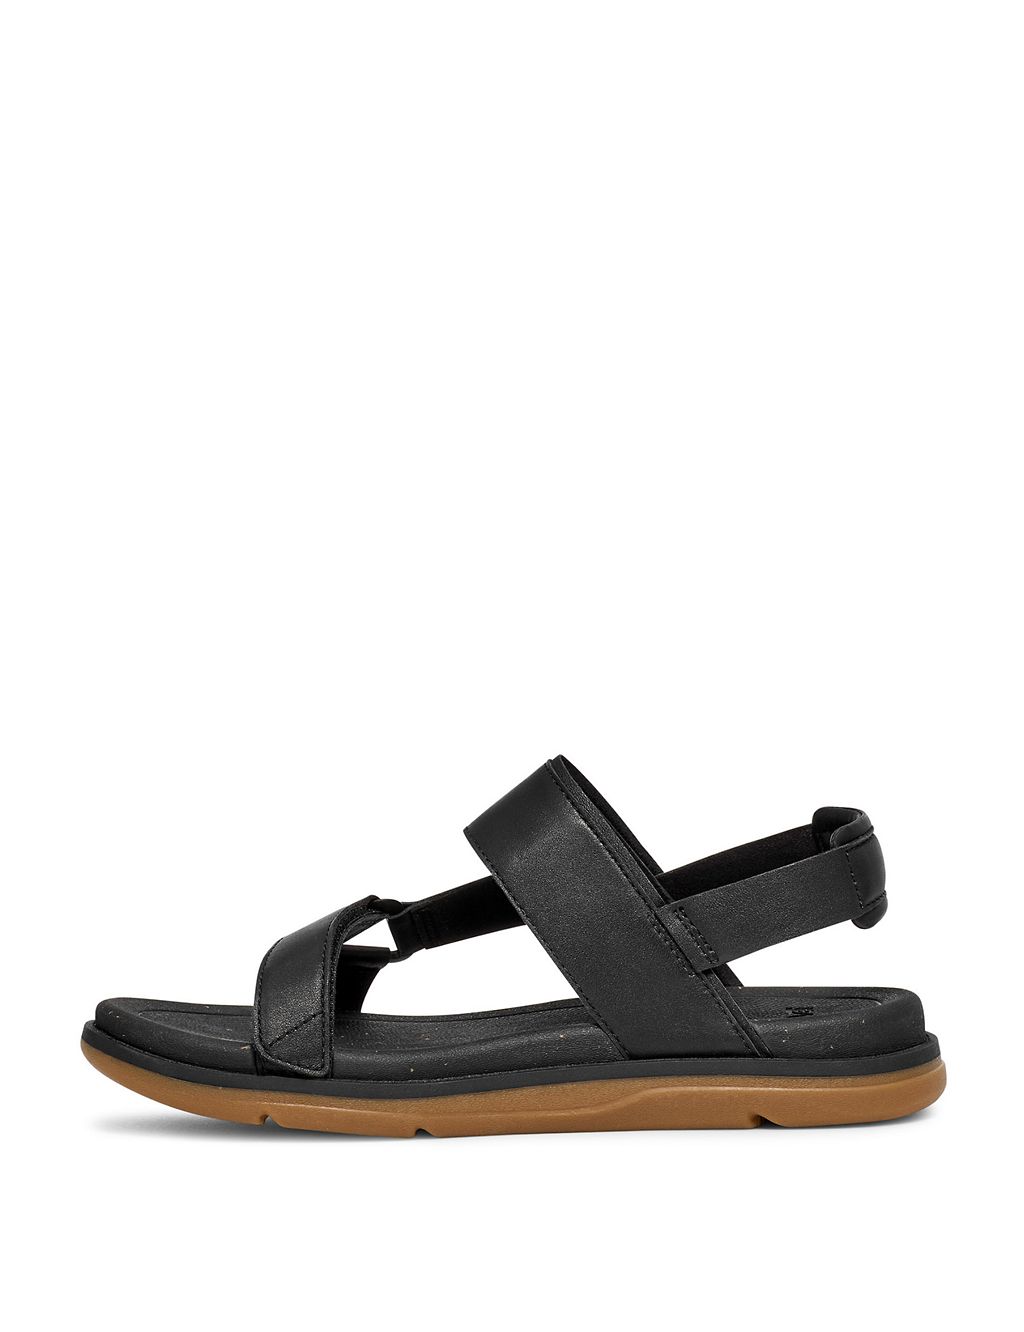 Madera Leather Flat Slingback Sandals 2 of 5